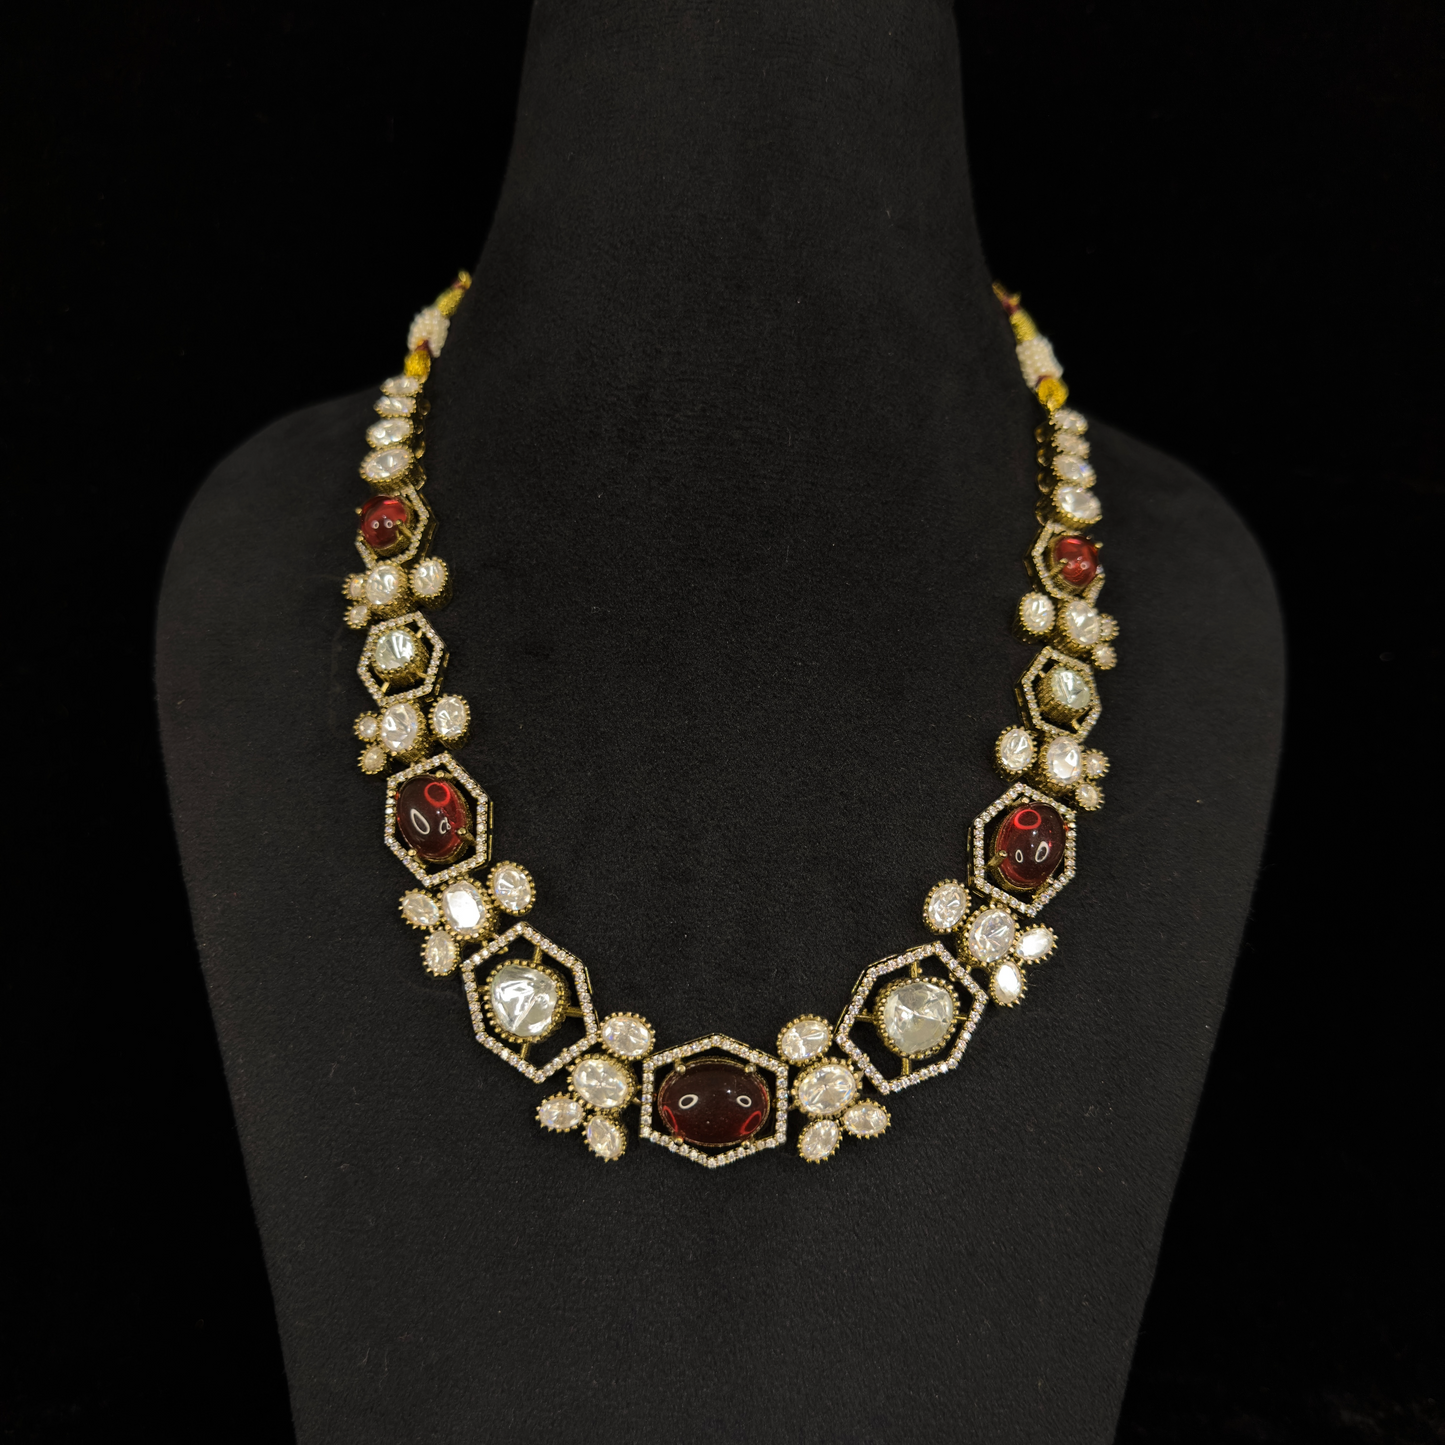 Antique Victorian Necklace with Polki Kundan Stones and earrings